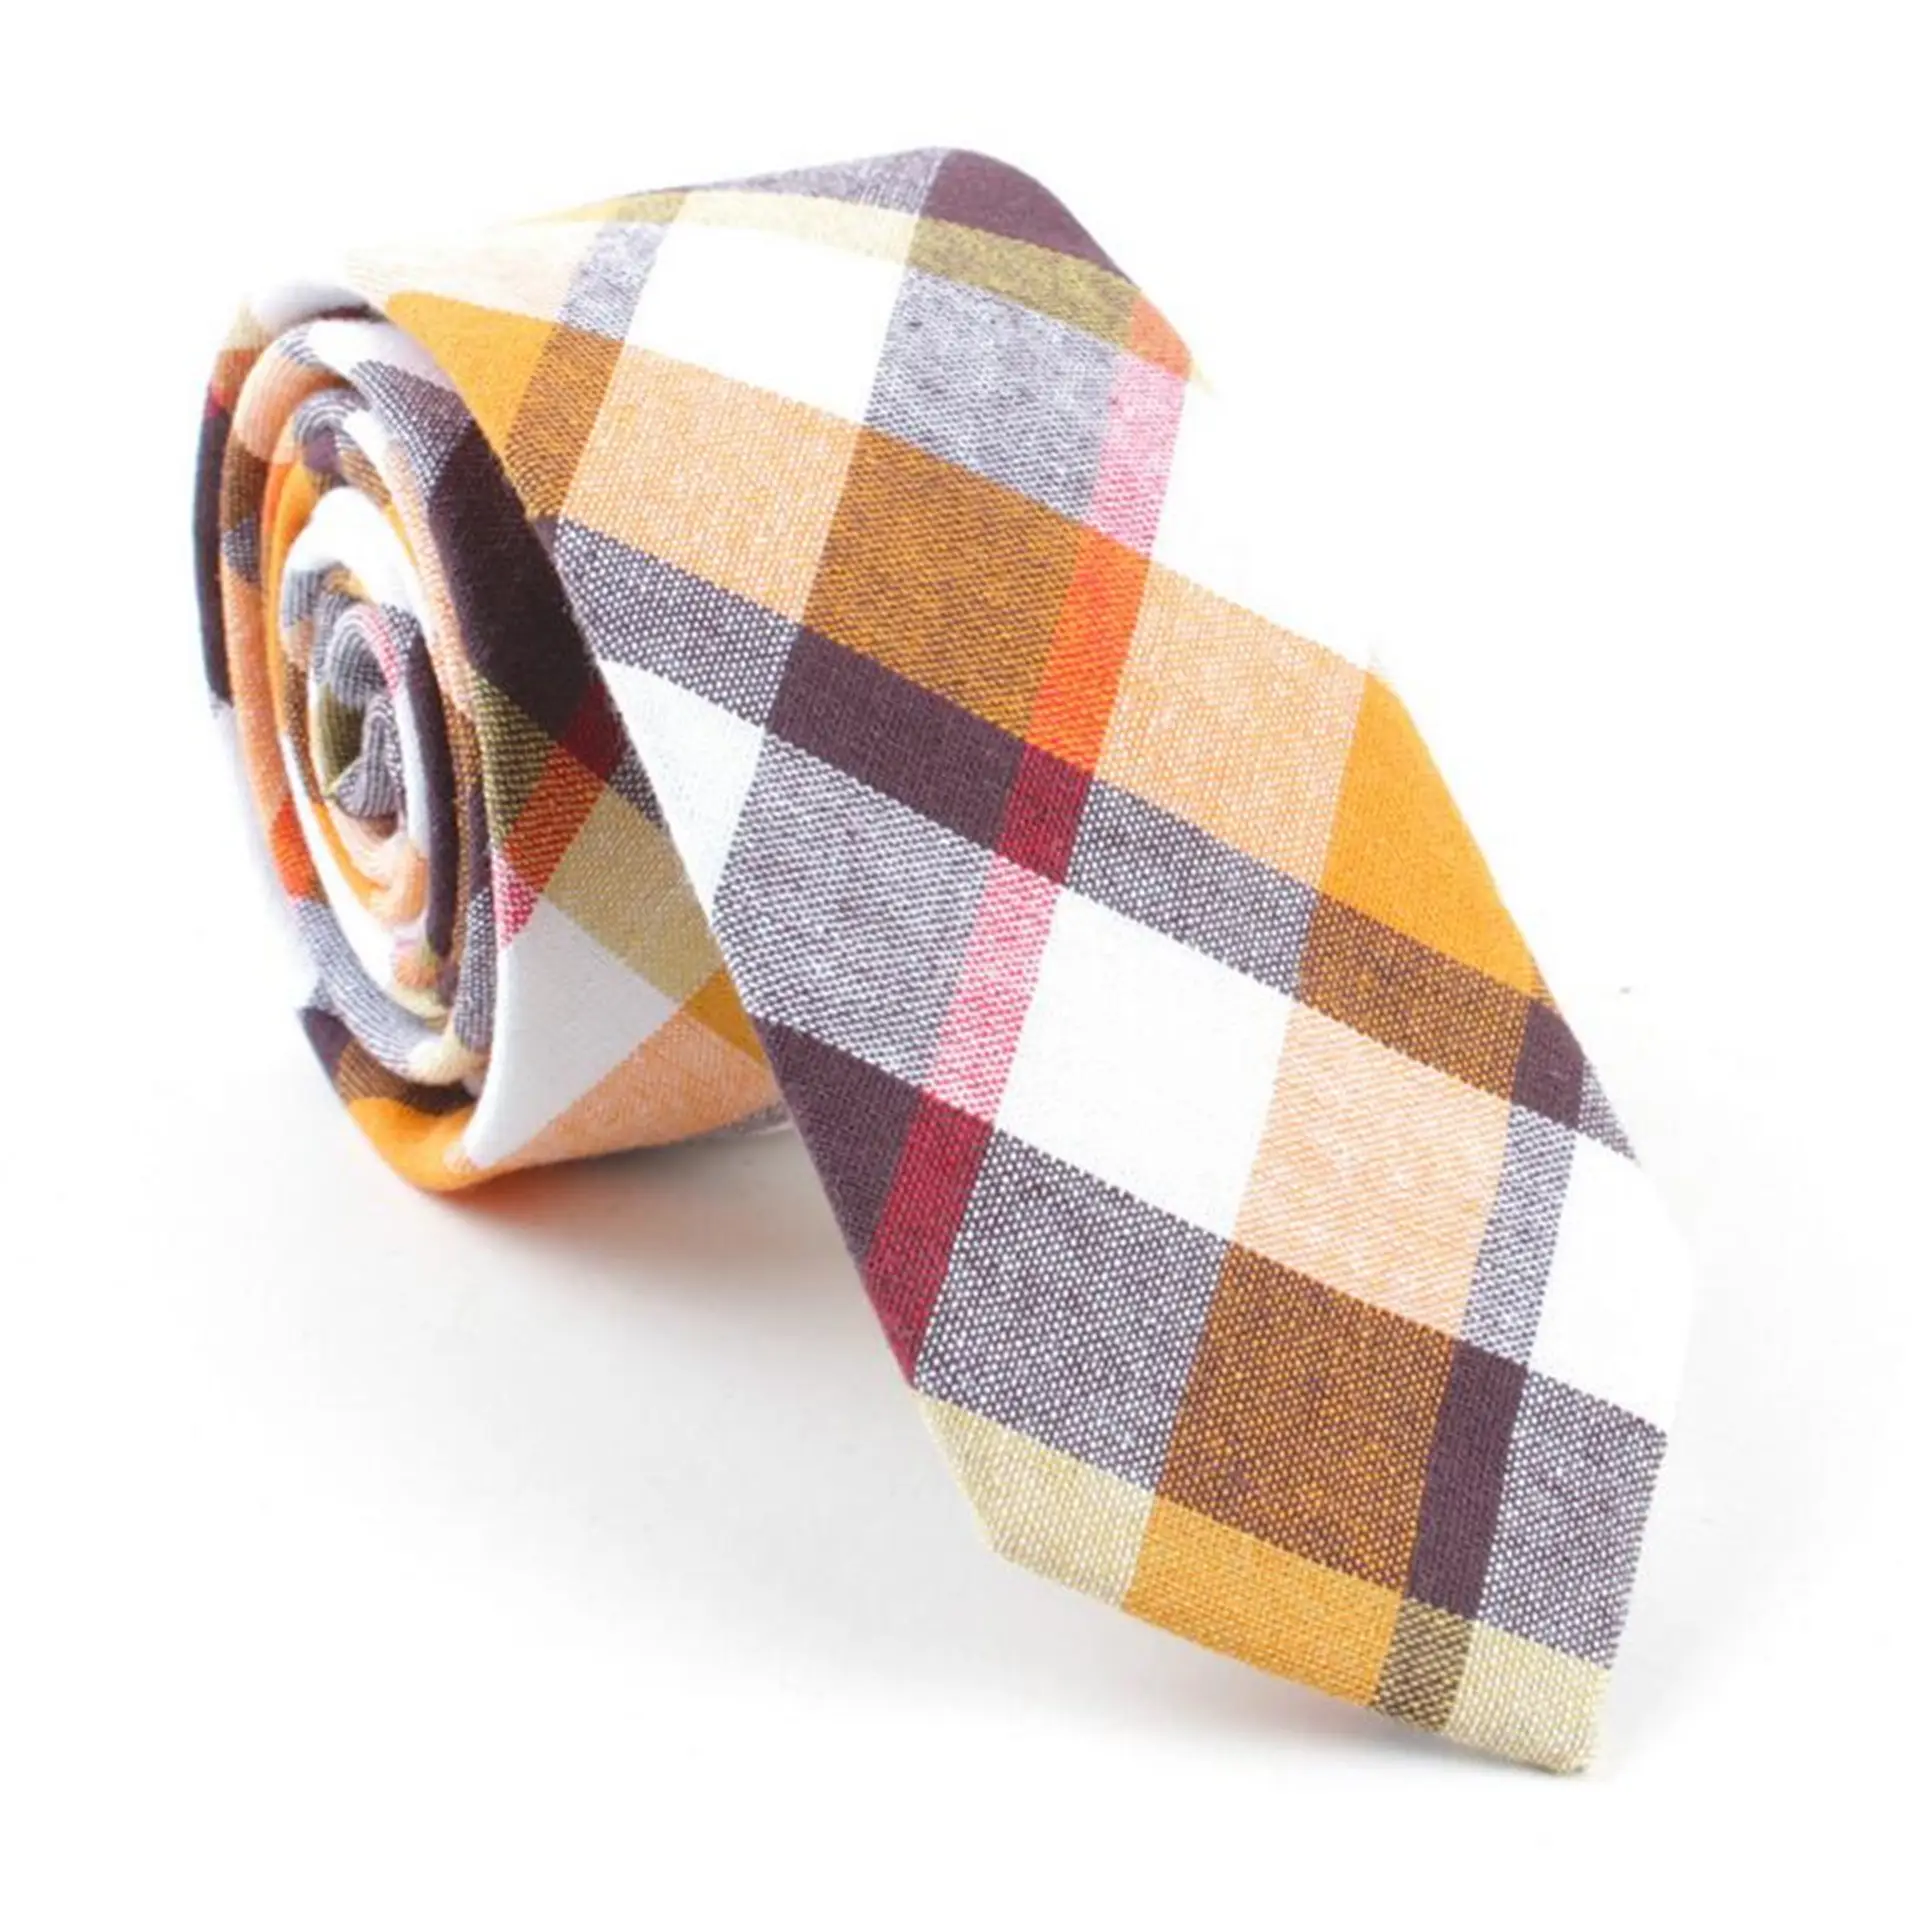 Wholesale Other Ties and Accessories Casual plaid cotton tie 100% cotton necktie